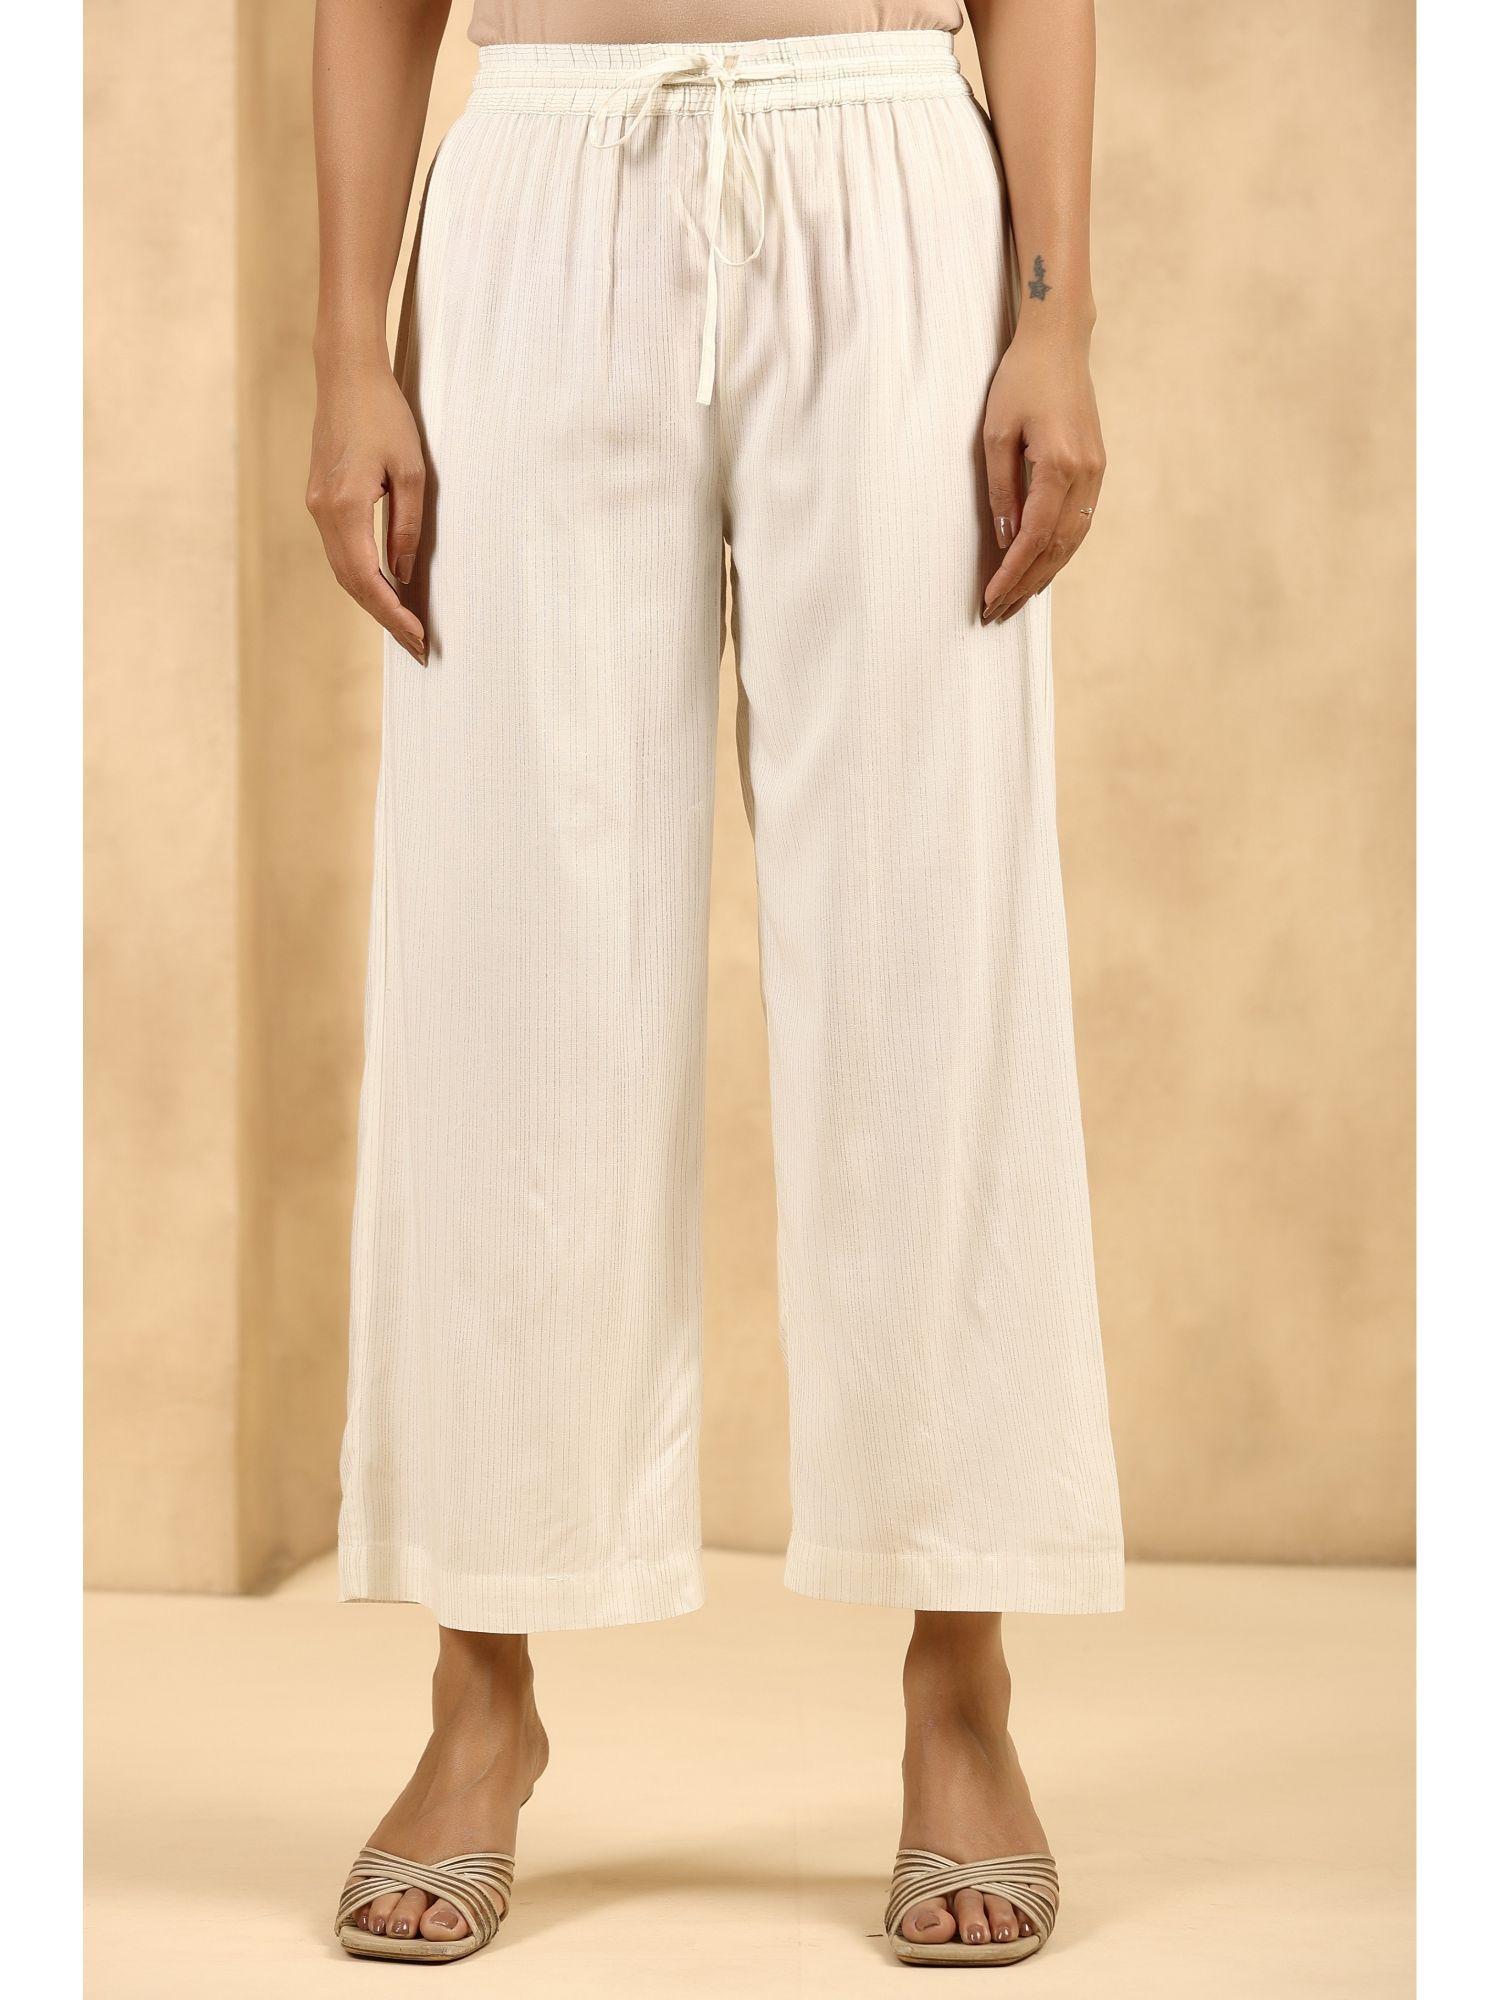 off-white rayon solid wide leg palazzo with drawstring and elasticated waistband